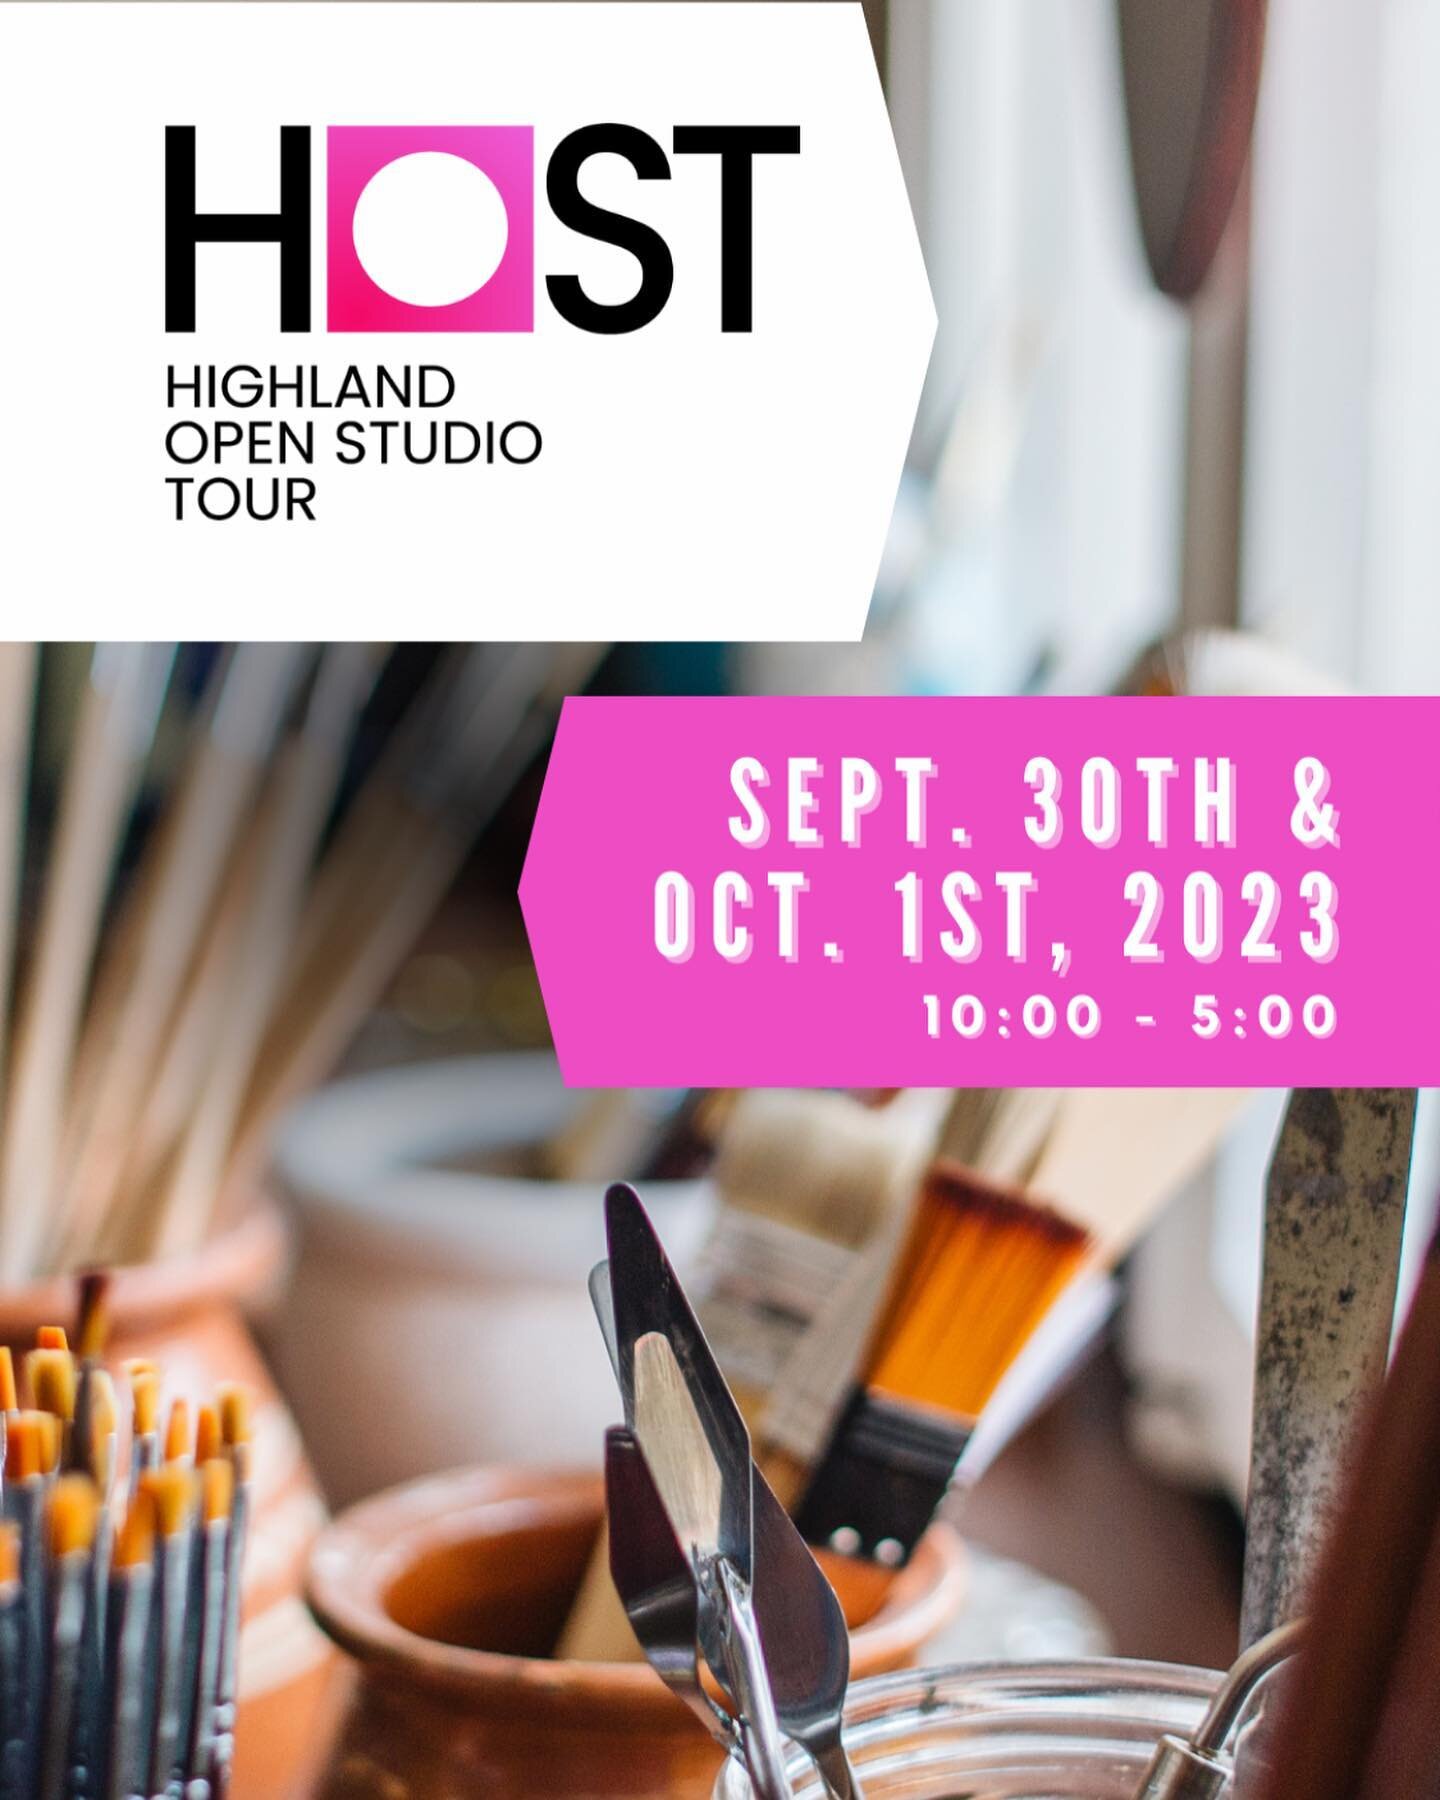 Some of the artists participating in the launch of Highland open Studio Tours September 30-October 1st!
#upcomingeventsinhighlandny 
#hudsonvalleyartists 
#hudsonvalleynyartist 
#artshow